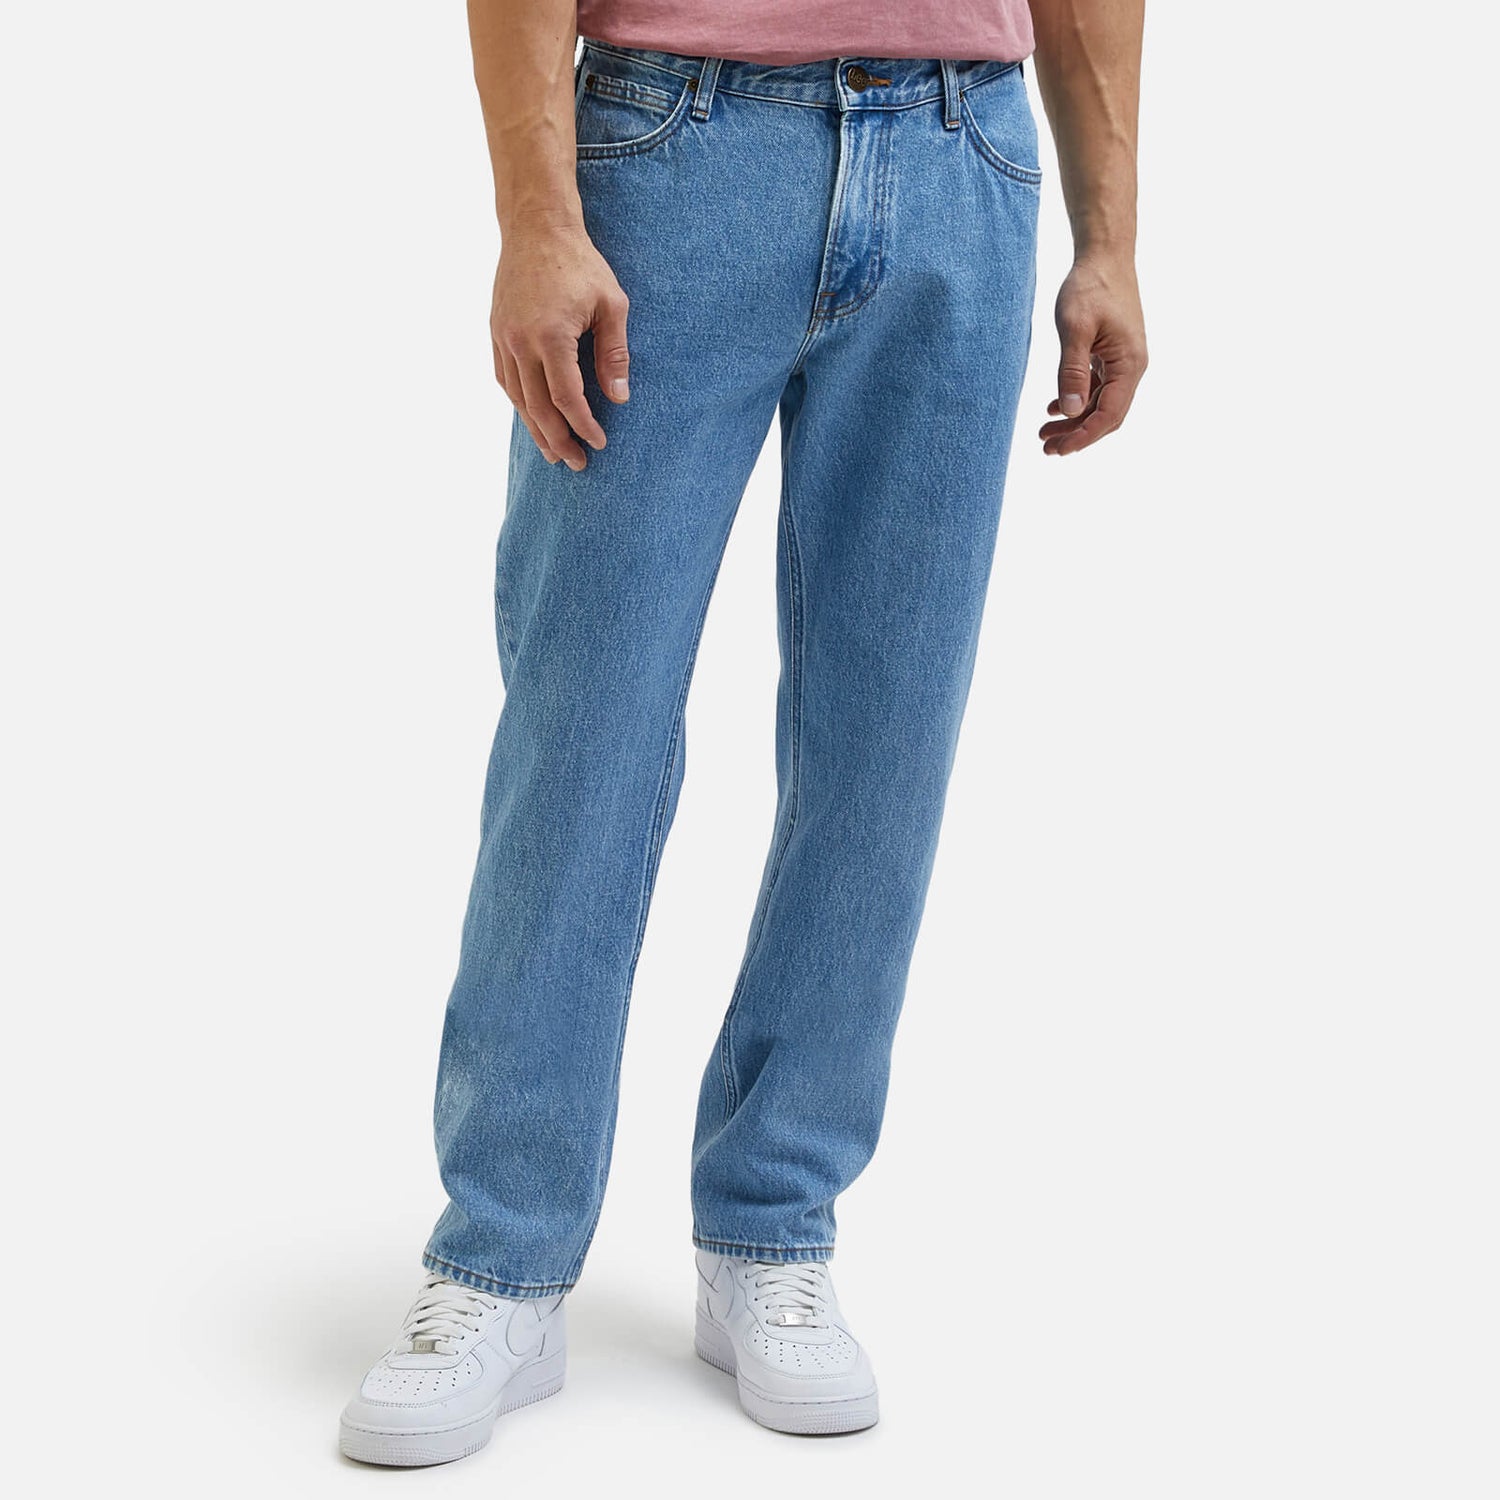 Lee West Denim Relaxed Jeans - W32/L32